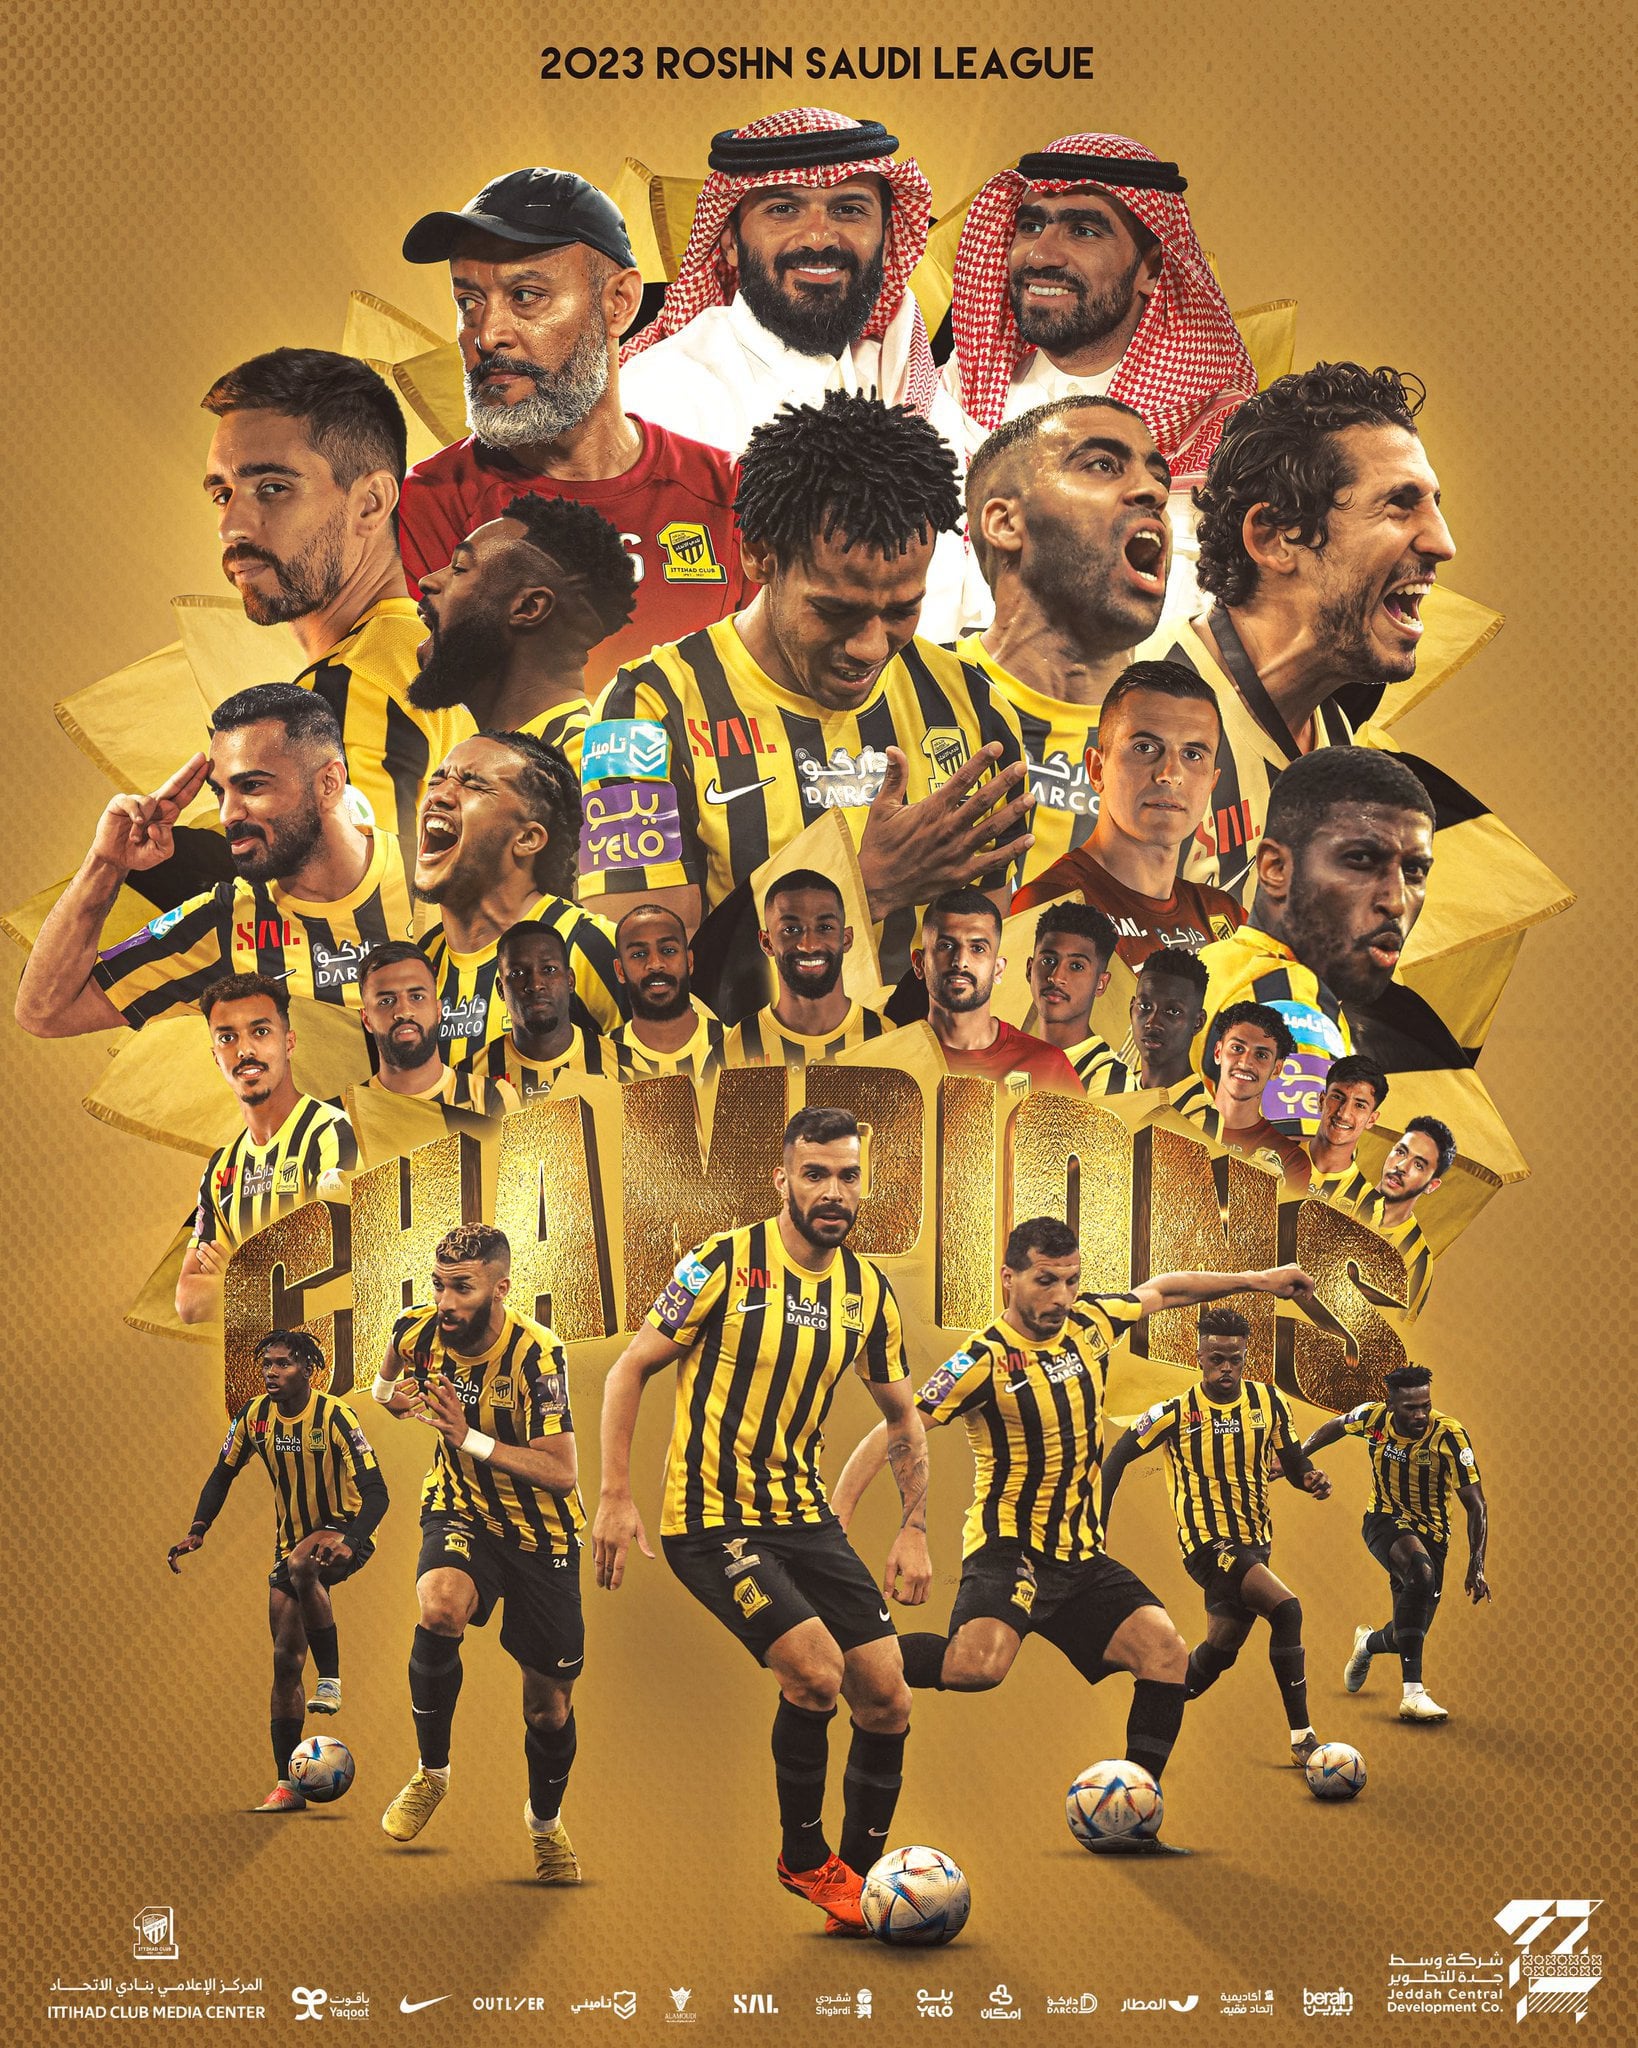 Ittihad Al Ittihad Are The Champions Of Saudi Pro League “Roshn” 22 23 Season And For The 9th Time In Their History!